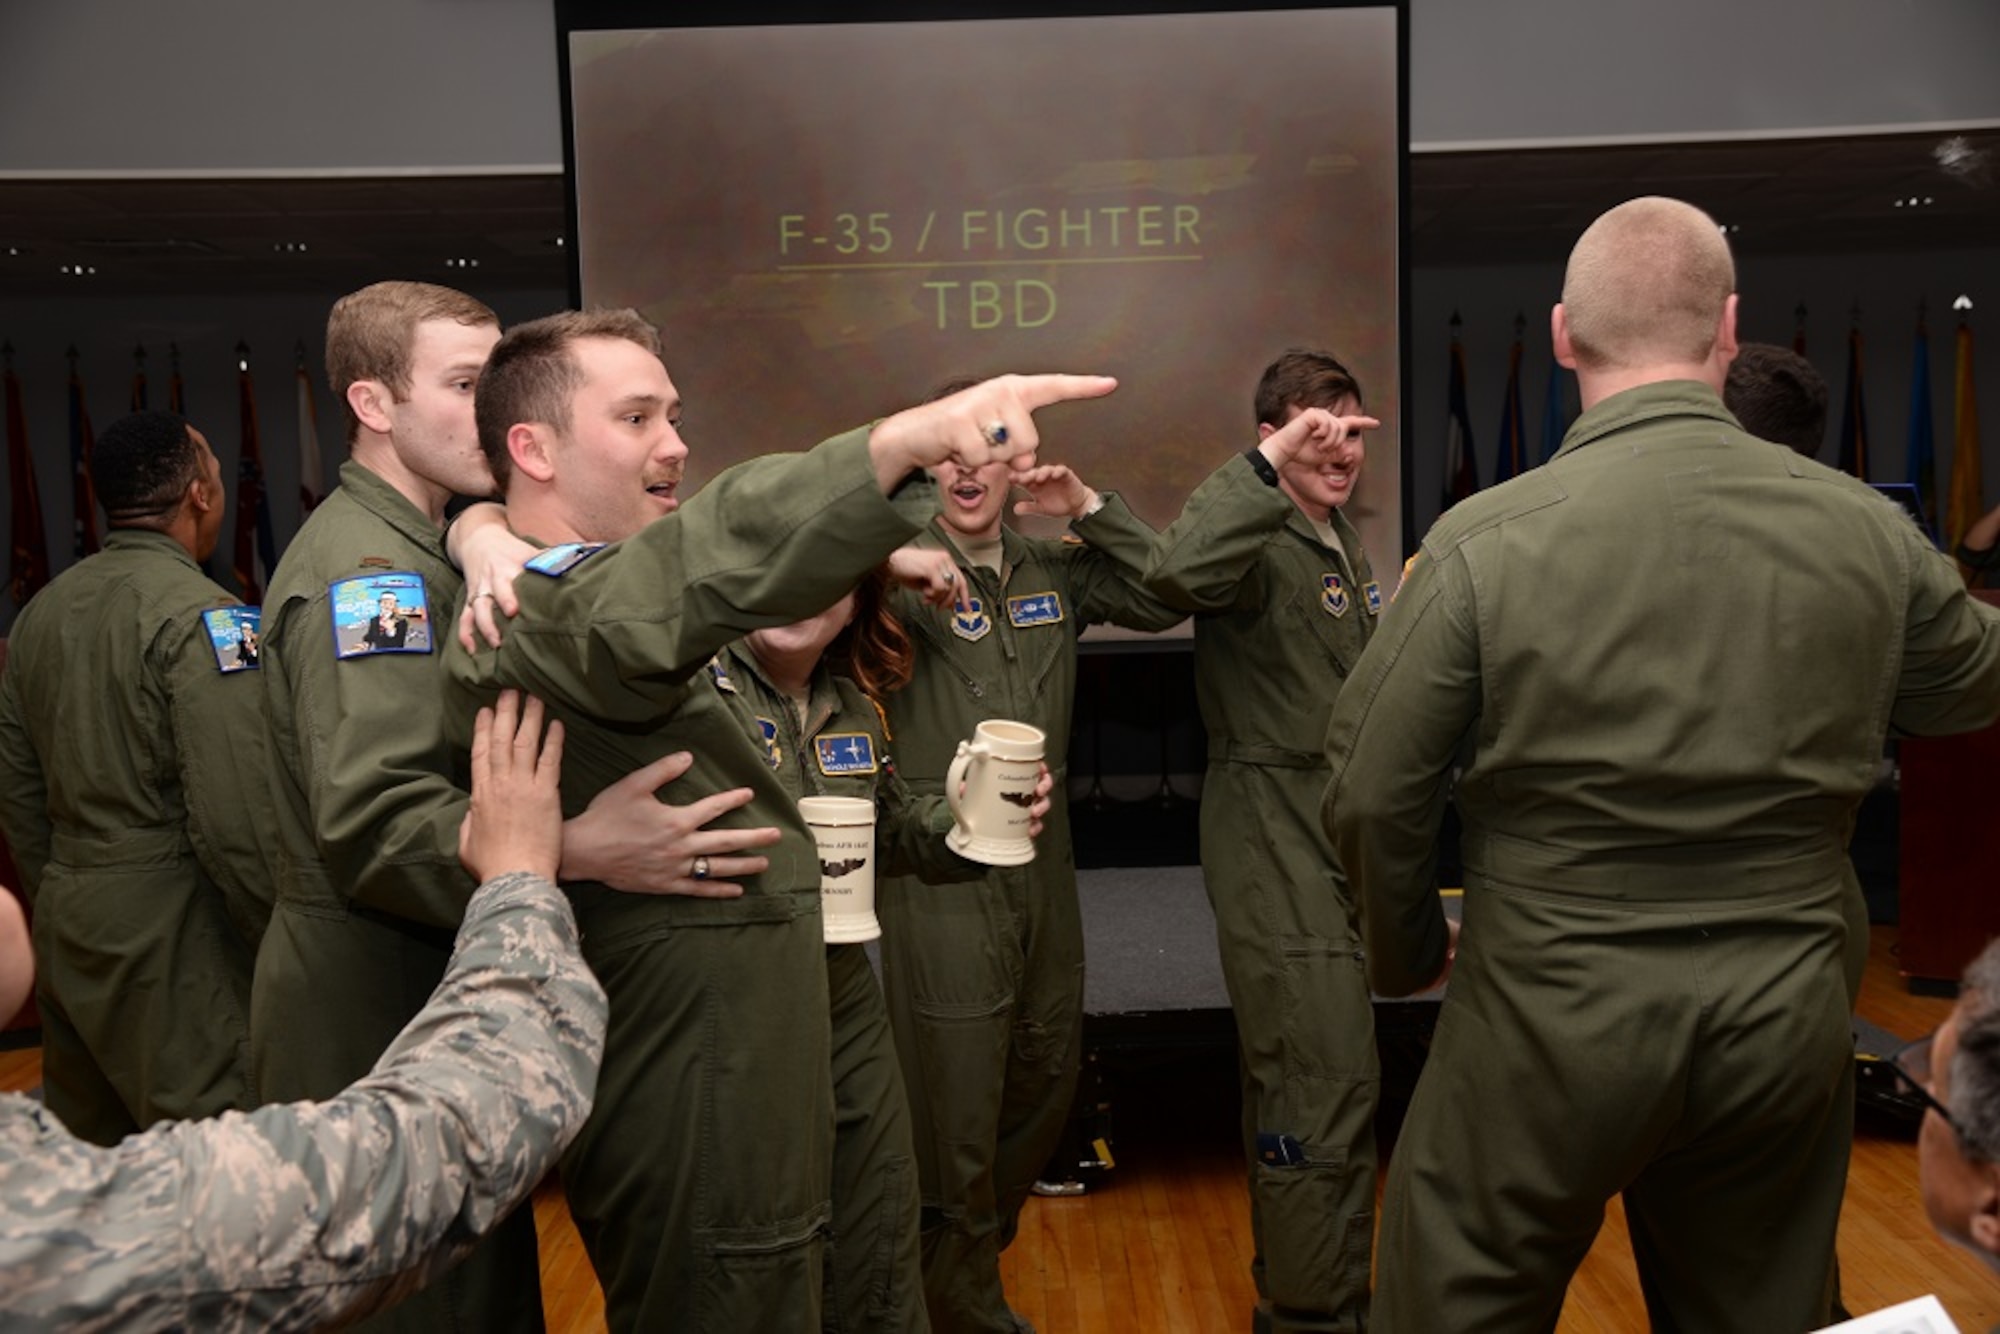 Second Lt. Austin Hornsby, Specialized Undergraduate Pilot Training Class 16-07, celebrates with his flightmates after receiving his assignment to fly the F-35 Lightning II at 16-07 assignment night on Columbus Air Force Base, Mississippi, March 25. Hornsby will be the first SUPT student ever to accept the challenge of piloting the F-35. (U.S. Air Force photo illustration/Senior Airman Stephanie Englar)